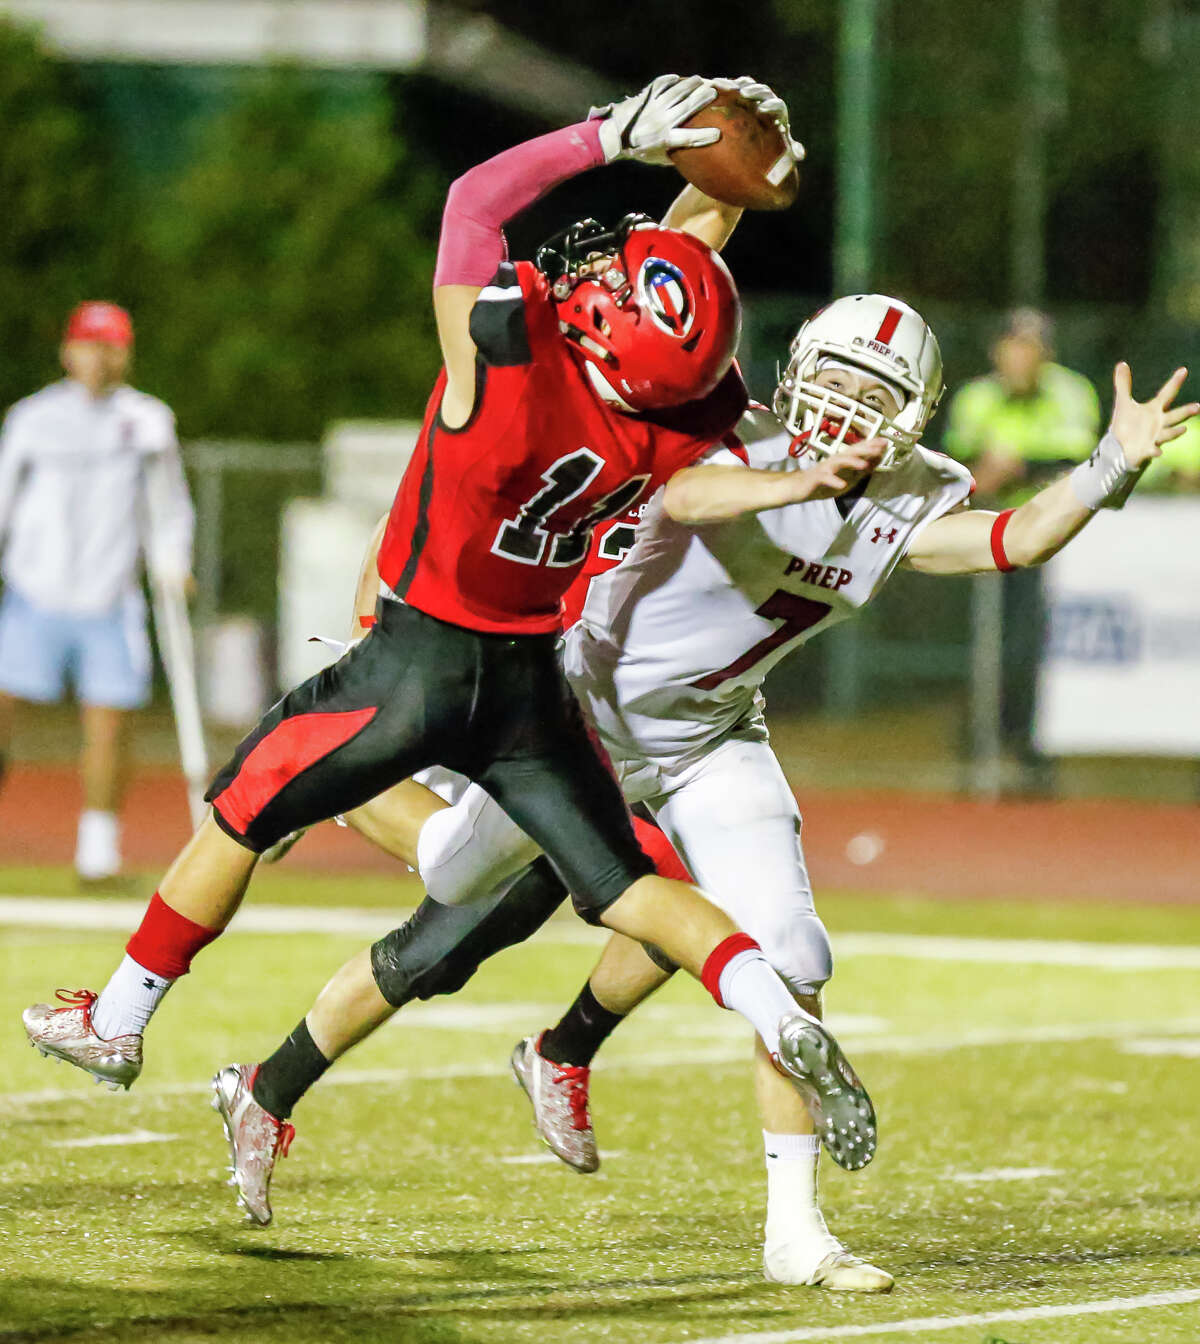 Cheshire Ram defender Josh Frenkel(11) intercepts a late first half pass intended for Fairfield Prep’s Drew Mcavey during the Rams 10-0 win over the Jesuits Friday evening. John Vanacore/New Haven Register